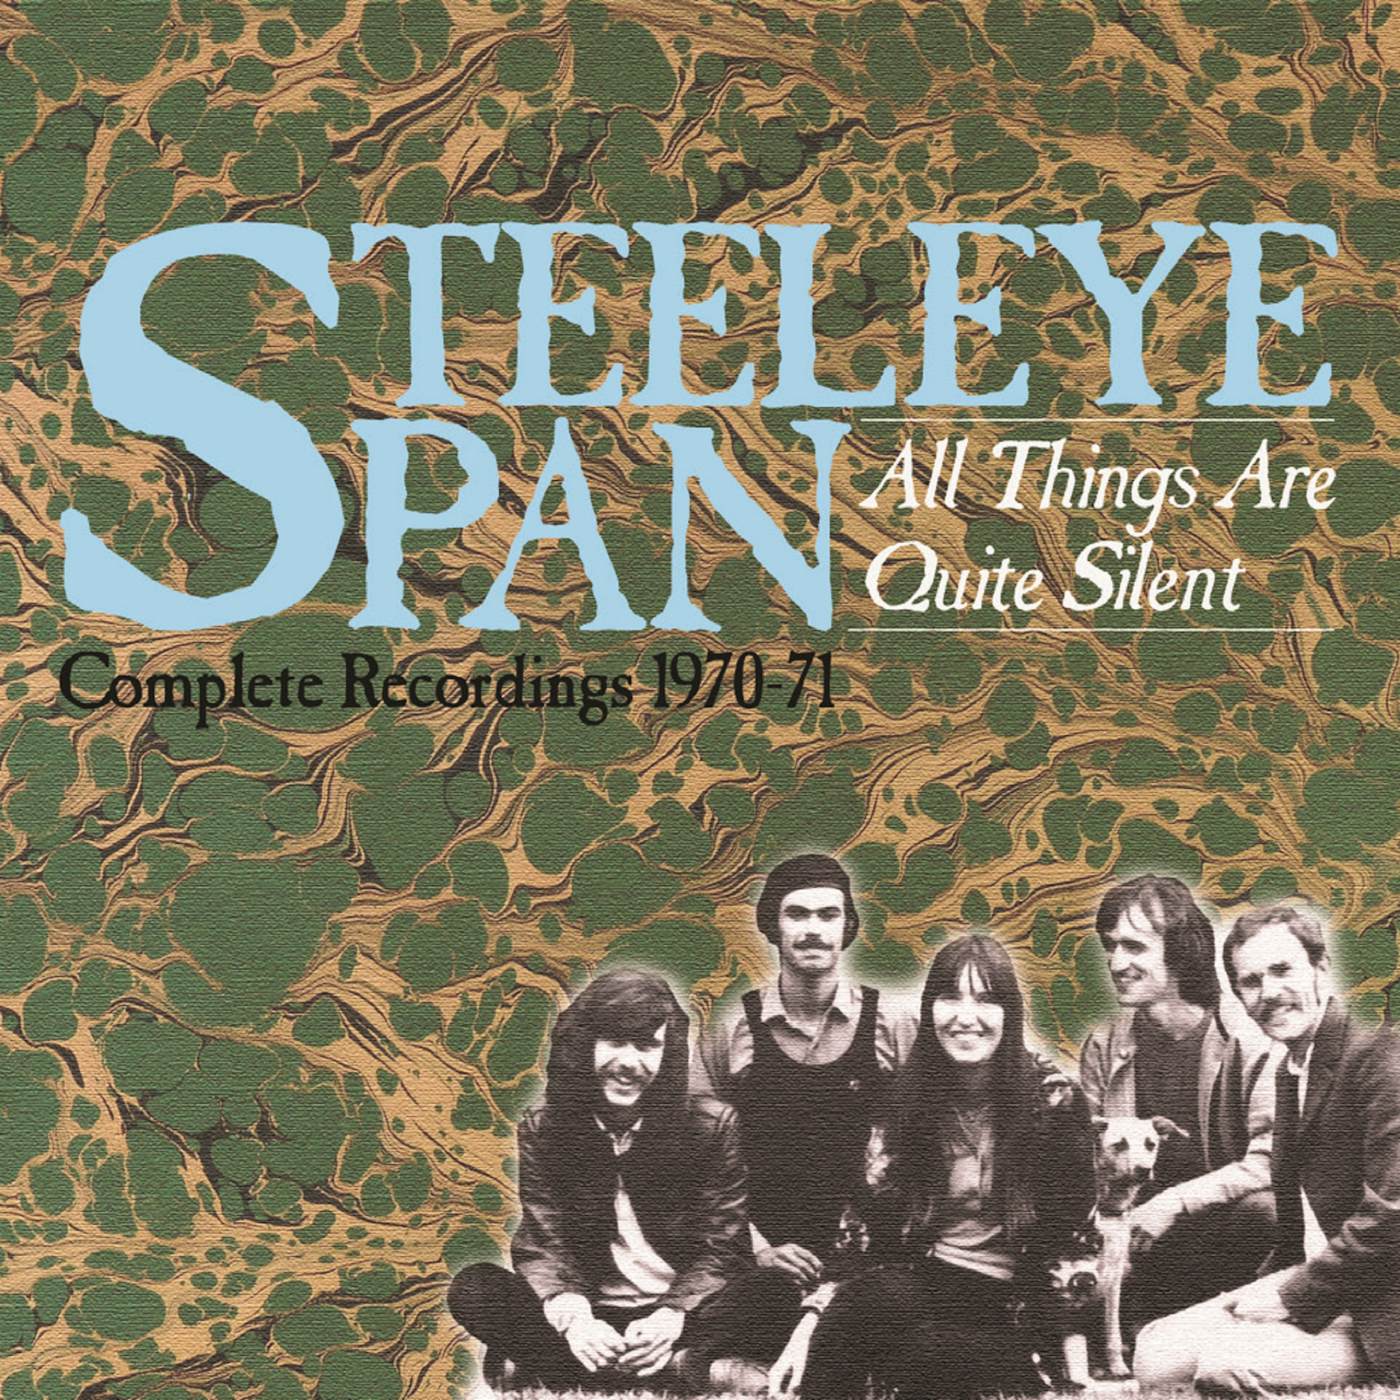 Steeleye Span ALL THINGS ARE QUITE SILENT: COMPLETE RECORDINGS CD